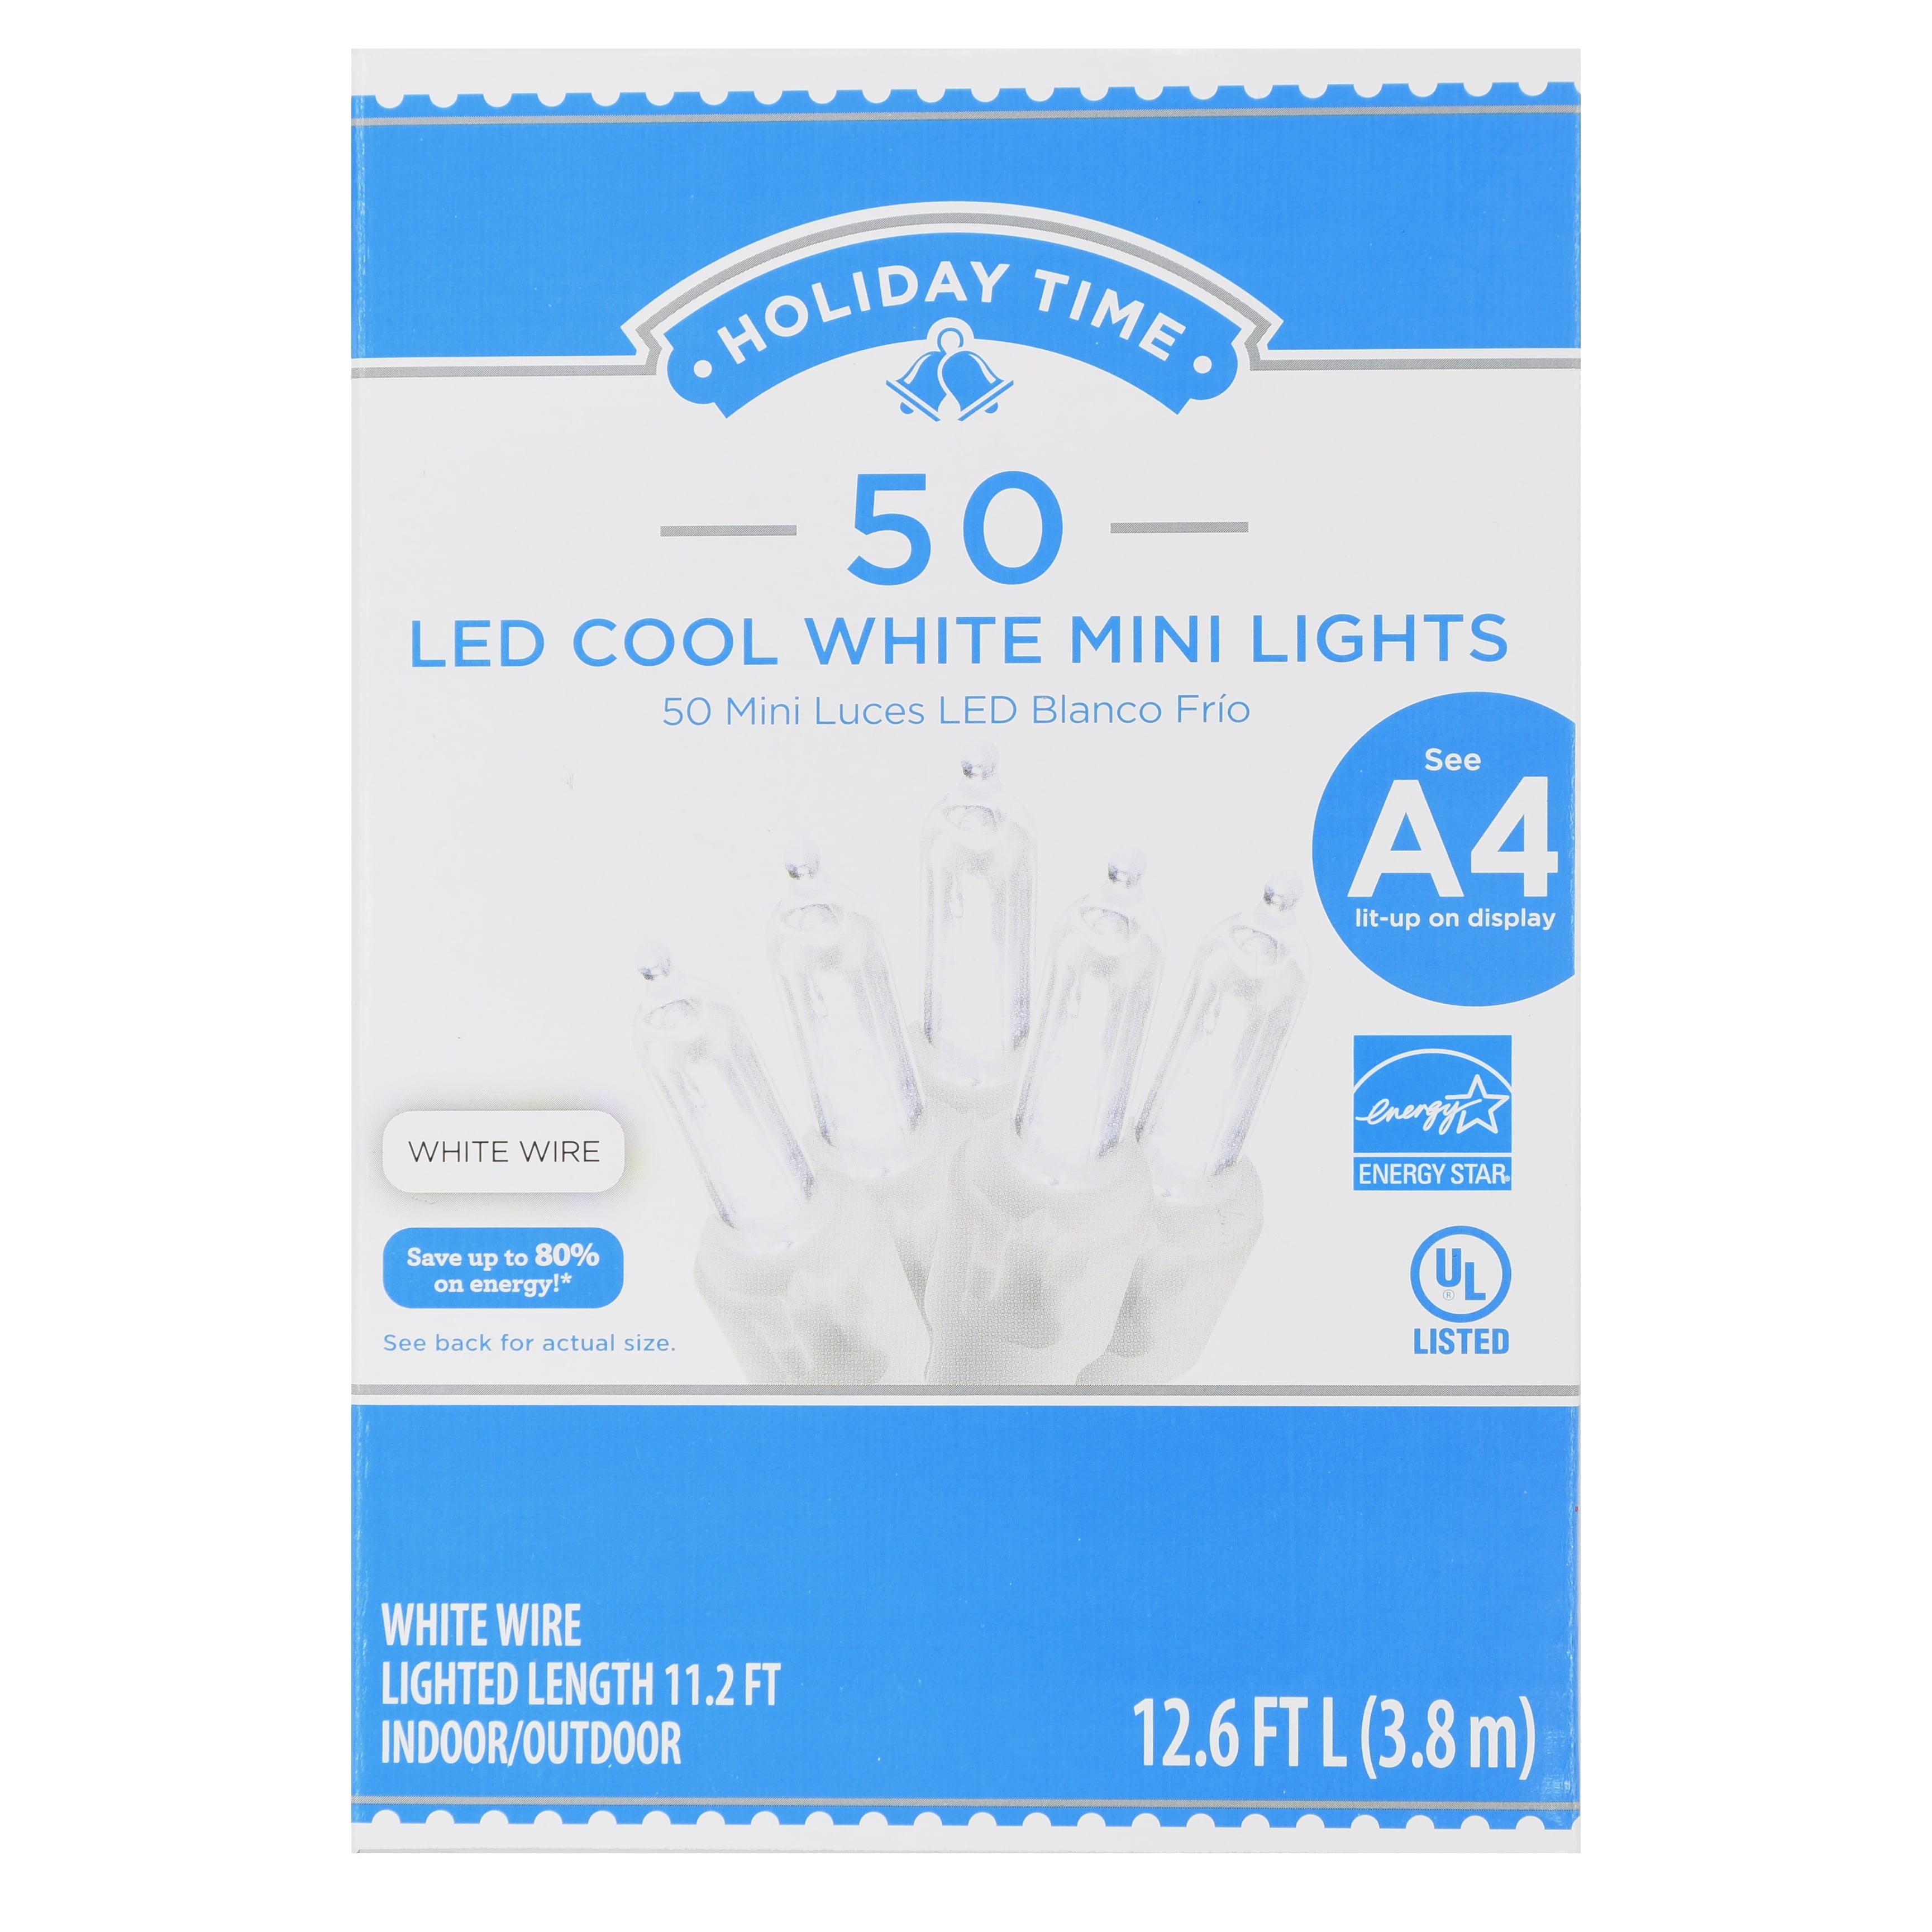 10 boxes Holiday Time 50 LED Cool White Mini Lights white wire wedding 500 total 